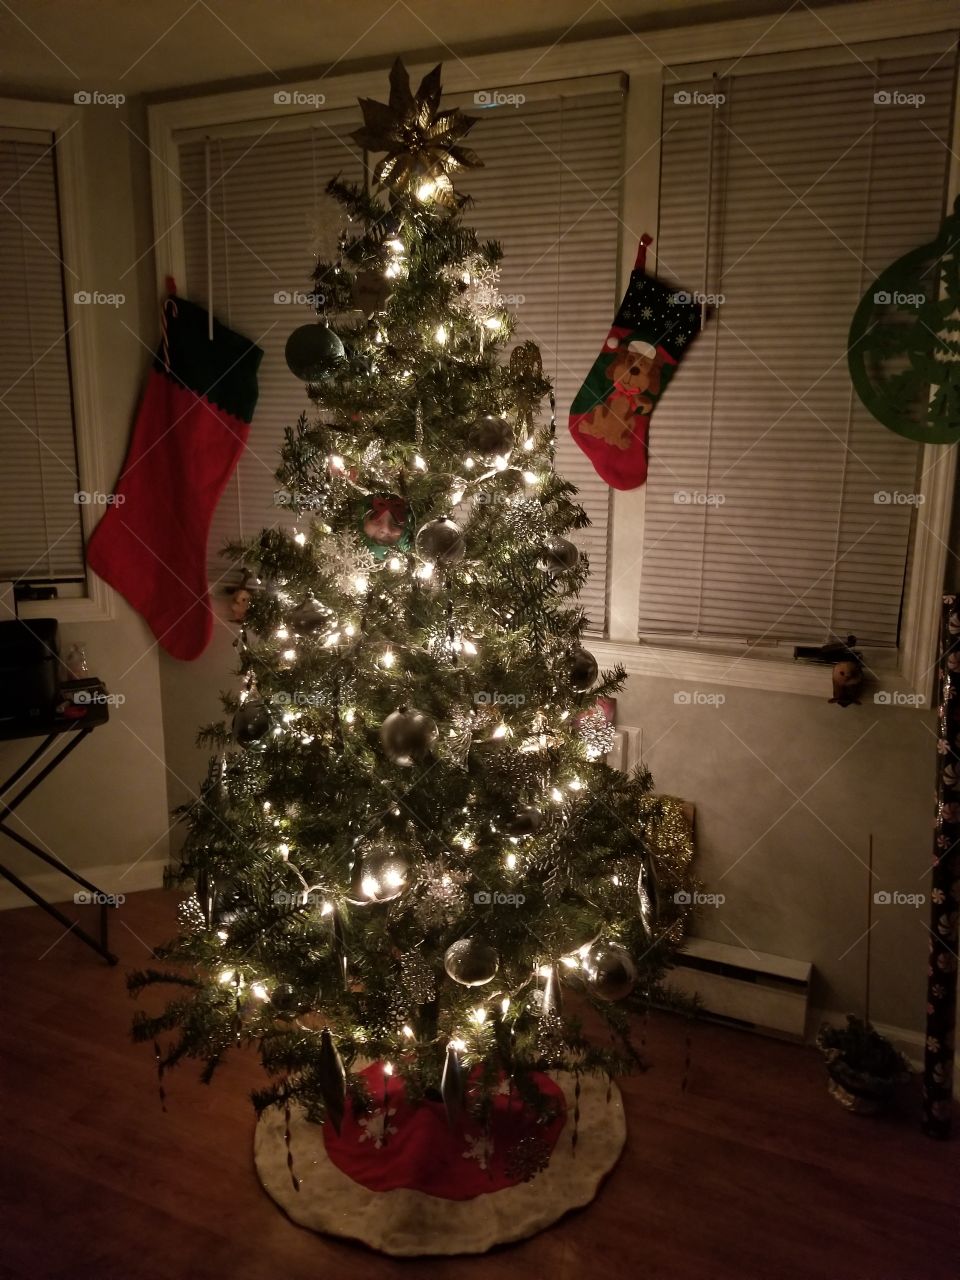 Our Family Christmas Tree